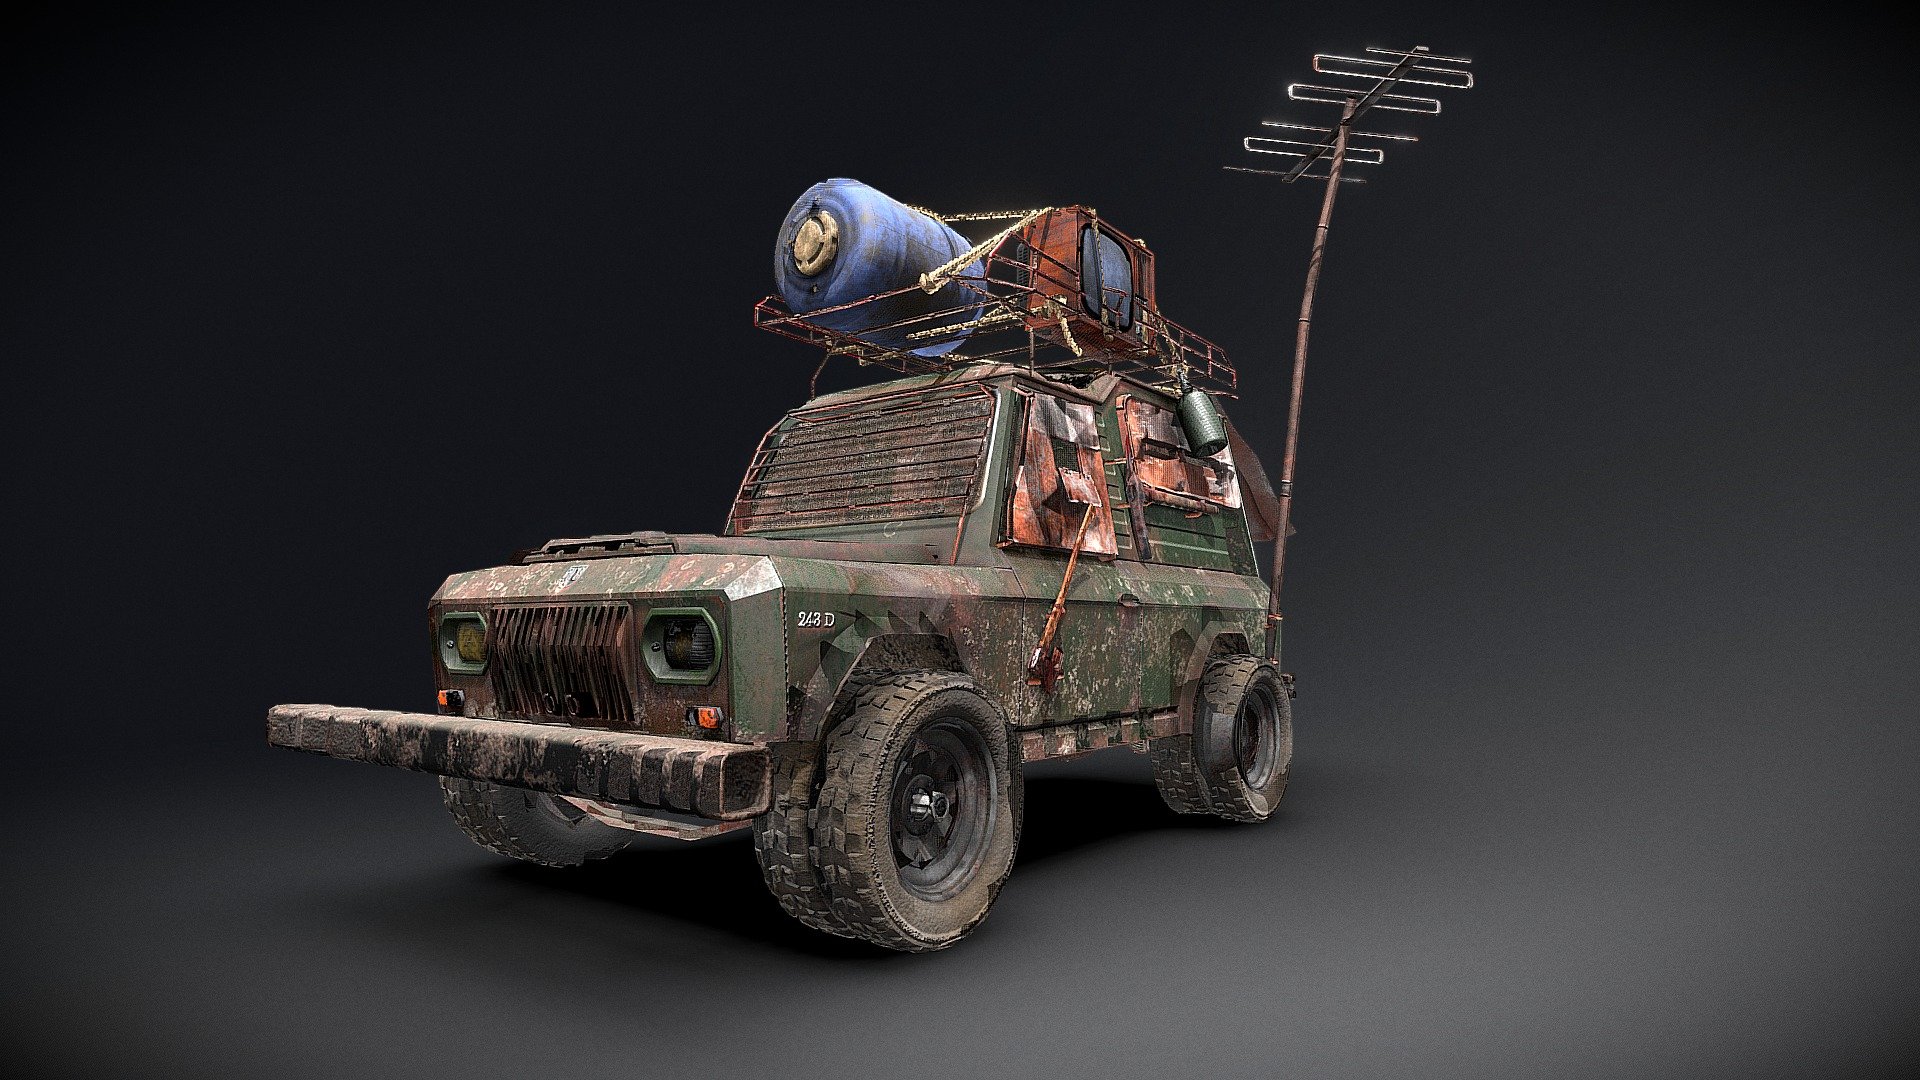 Romanian  made vehicle -ARO 243D is the main utility vehicle produced in Romania in communist era. This one is modified to be a bug-out vehicle in a post apocalyptic scenario in 1980's in eastern Europe. The vehicle is equipped with anti-zombies protection, some tools and  everyday objects found in almost every house in the communist era 3d model